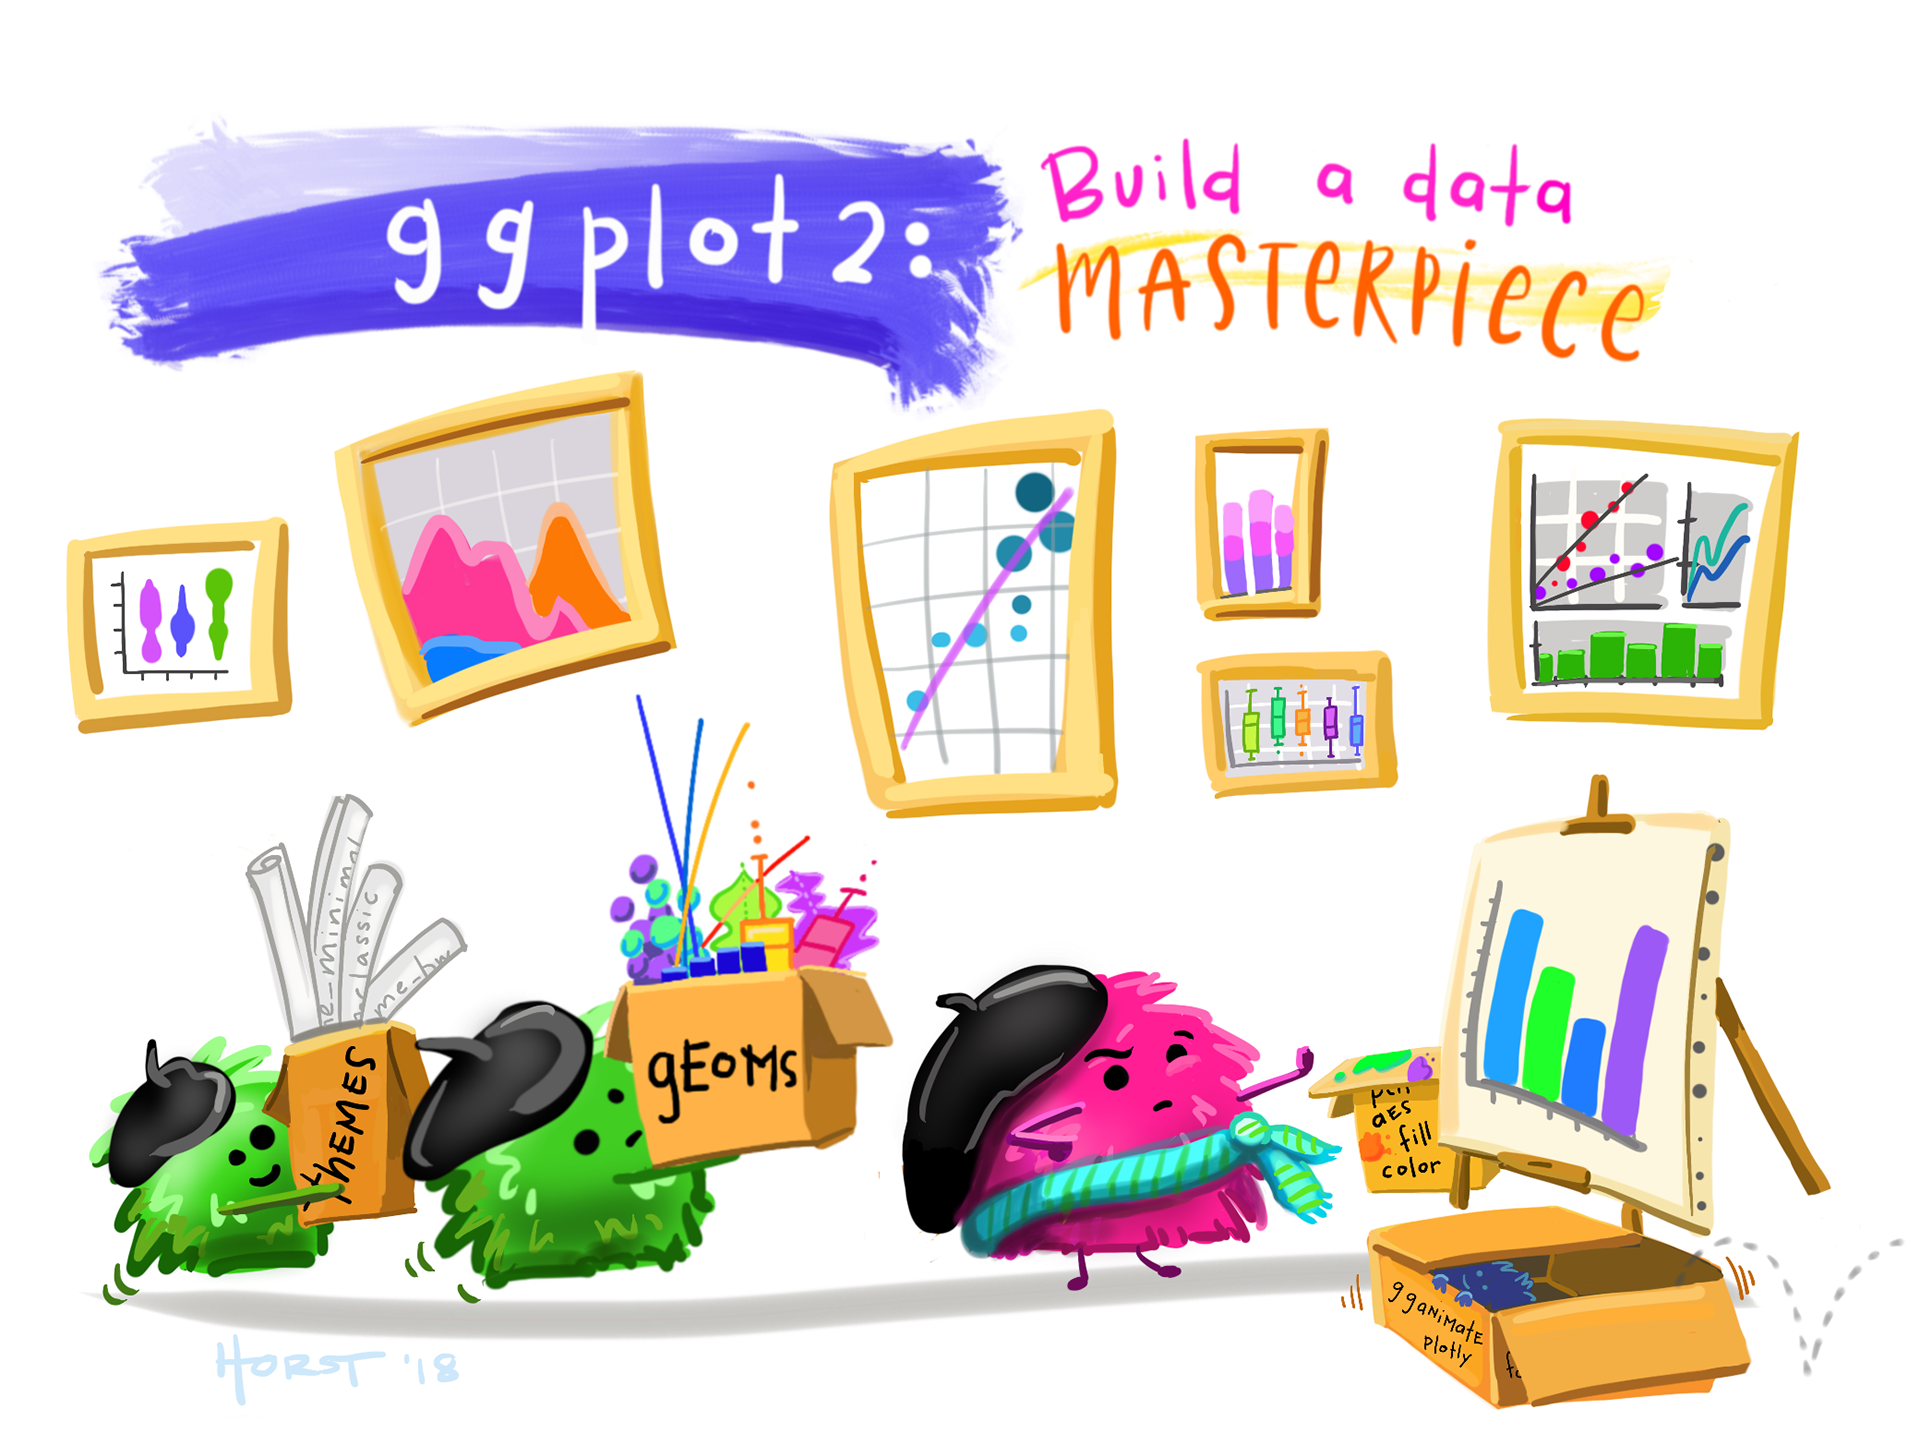 A fuzzy monster in a beret and scarf, critiquing their own column graph on a canvas in front of them while other assistant monsters (also in berets) carry over boxes full of elements that can be used to customize a graph (like themes and geometric shapes). In the background is a wall with framed data visualizations. Stylized text reads "ggplot2: build a data masterpiece."